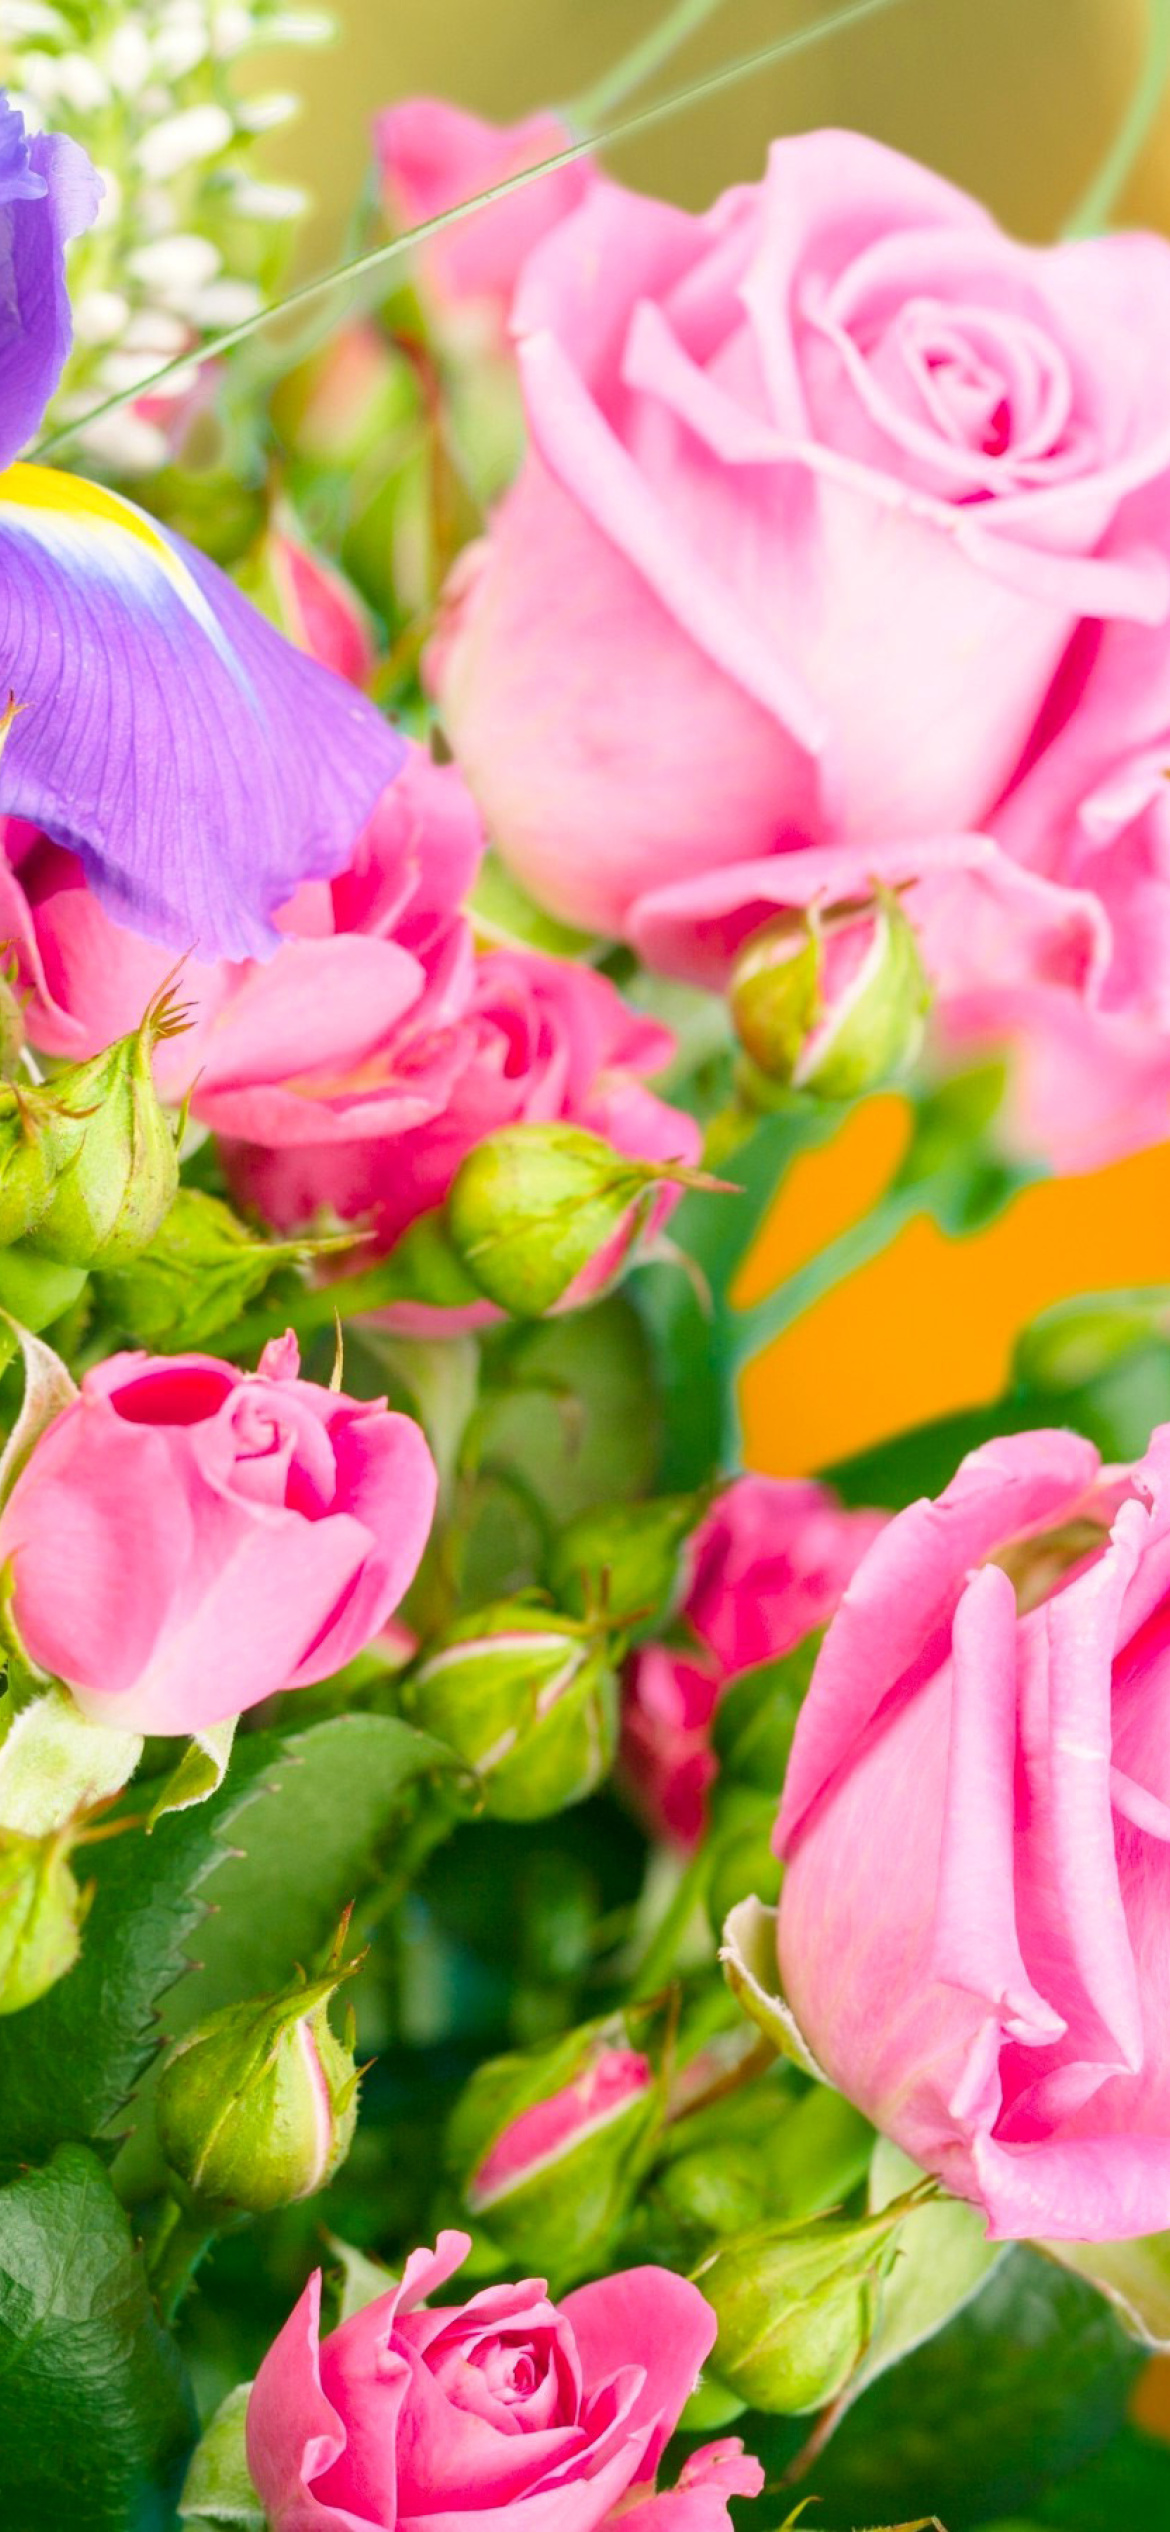 Spring bouquet of roses wallpaper 1170x2532